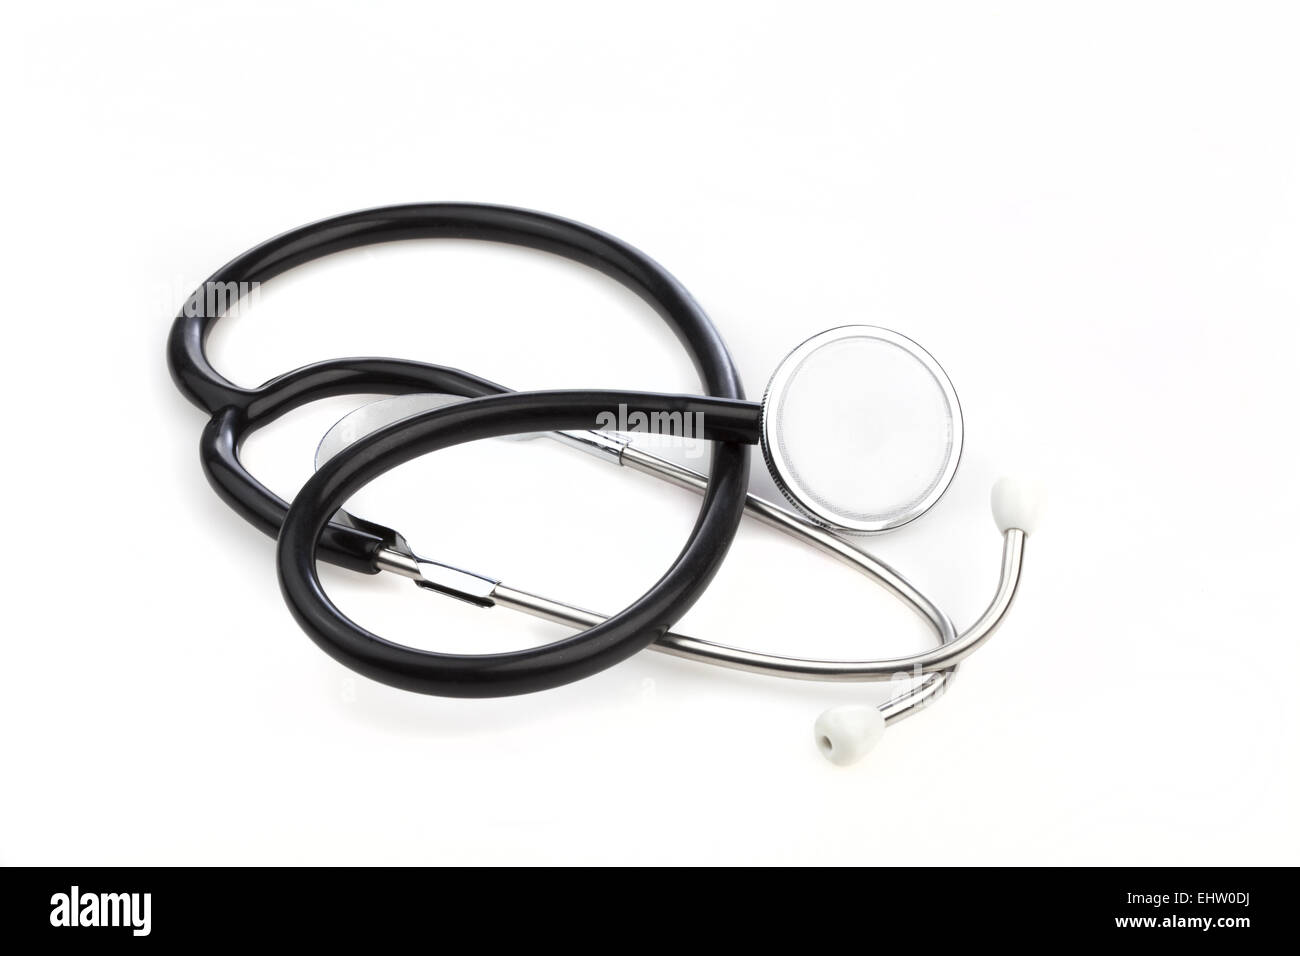 Stethoscope, medical device for auscultation Stock Photo